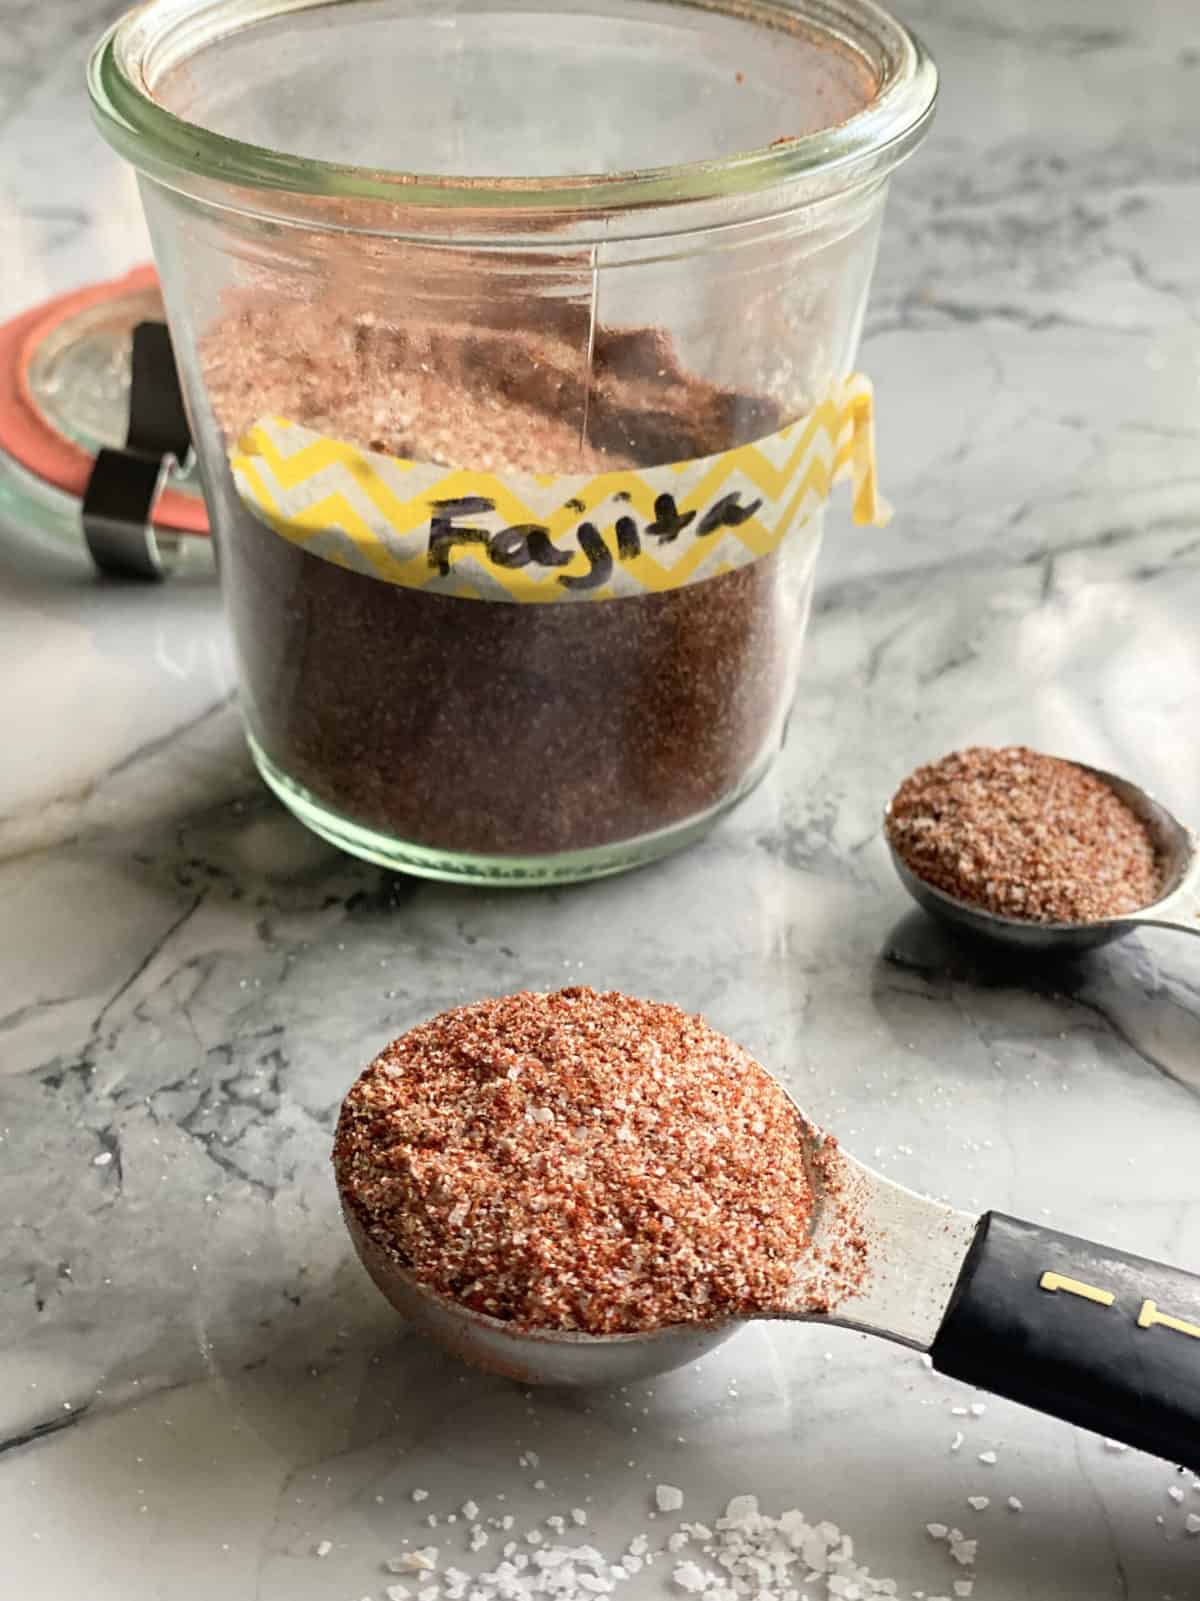 Glass jar with yellow tape label "fajita" with tablespoon filled with seasoning on countertop.